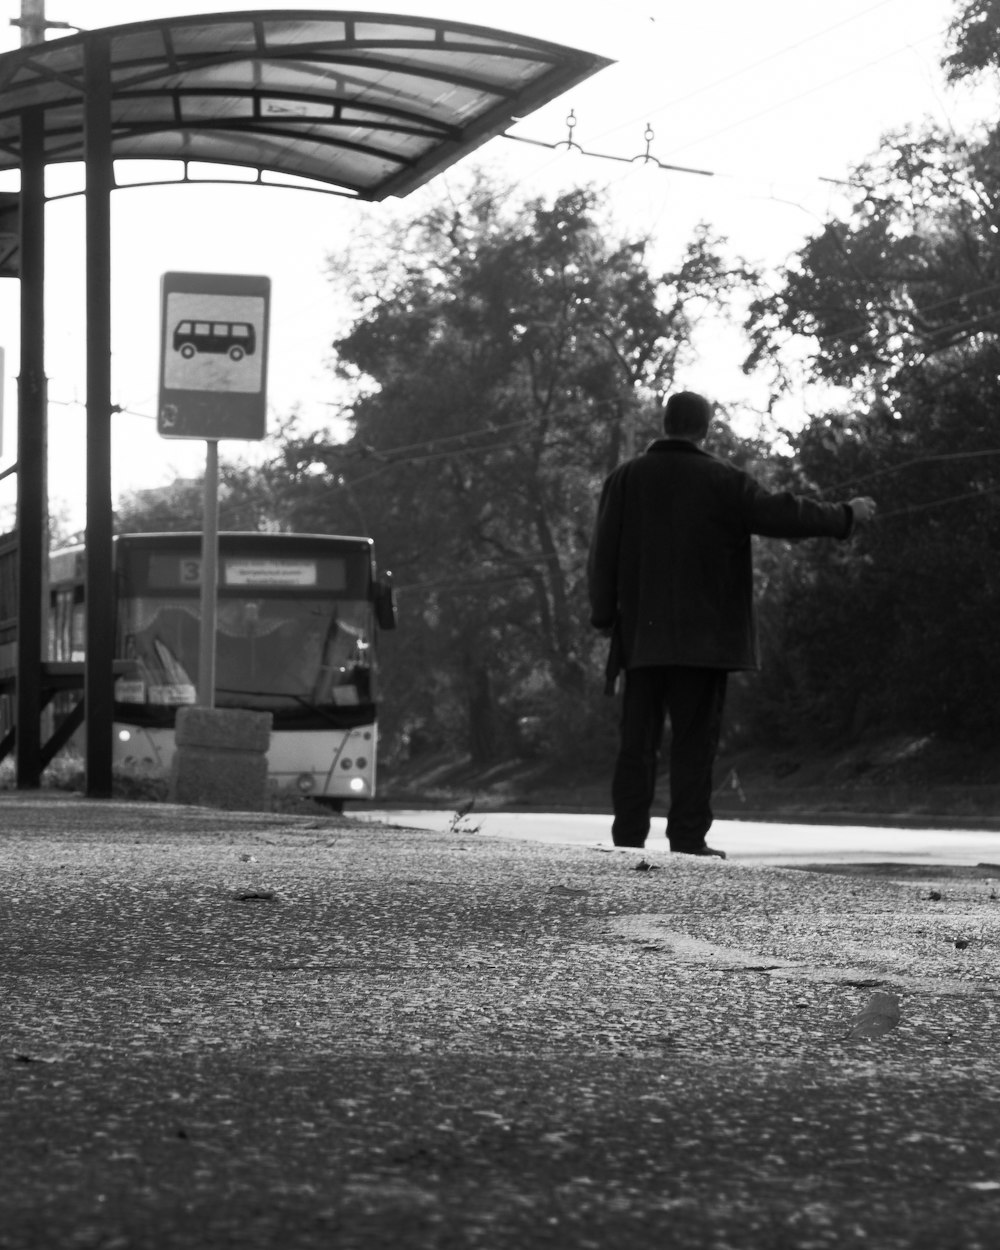 a black and white photo of a man waiting at a bus stop